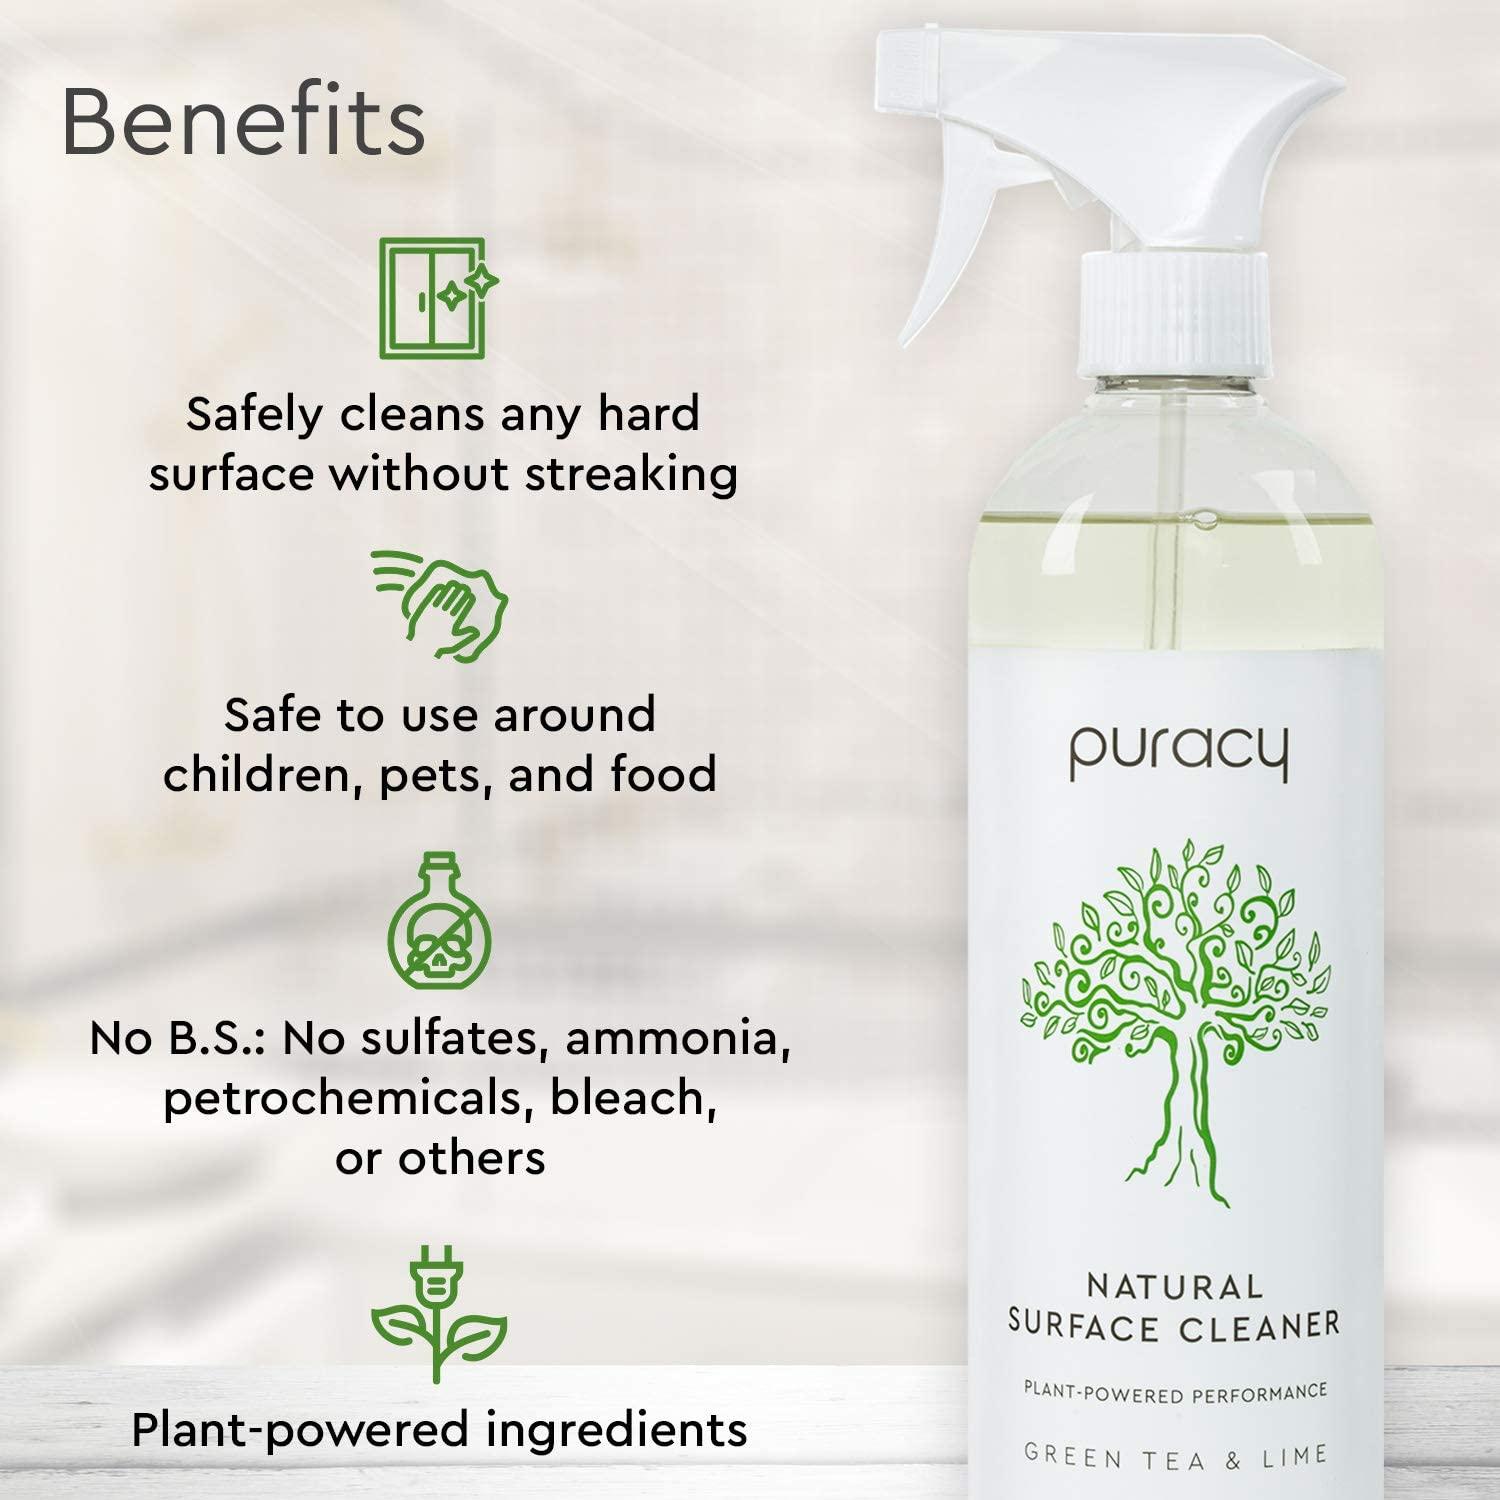 Puracy Stain Remover for Clothes - Laundry Spray for Fresh and Set-In Clothing Stains - Enzyme-Based Laundry Stain Remover - 99.96% Plant-Powered